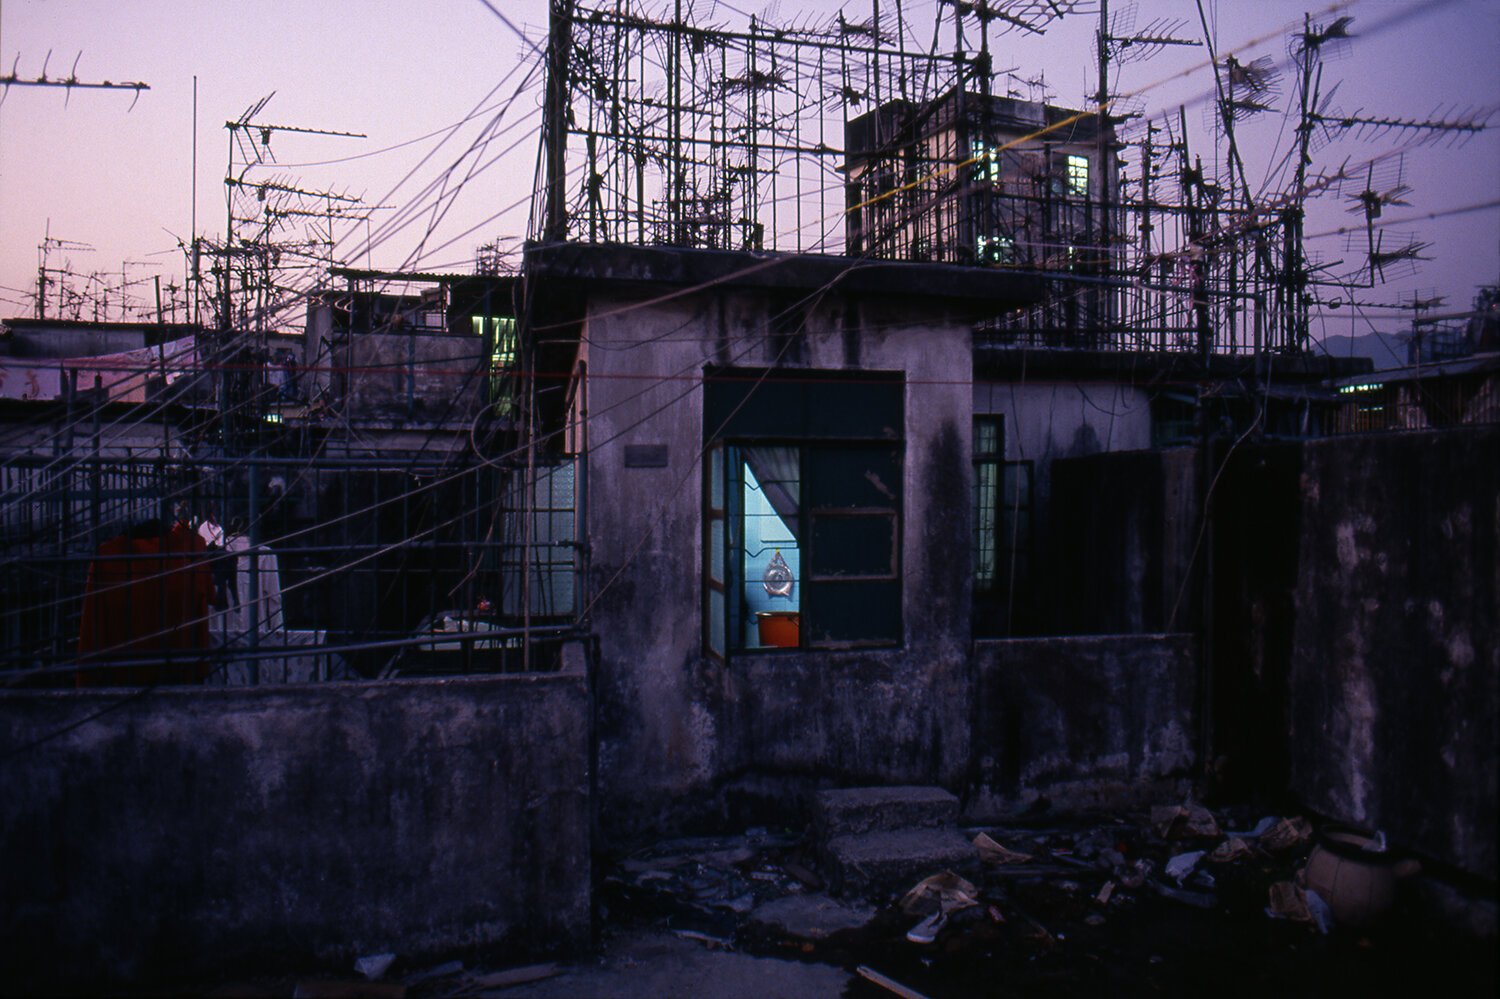 "Kowloon Walled City Rooftop. 1990" from the Series “City of Darkness Revisited” by Greg Girard | Canon F-1, Fujichrome Provia Film